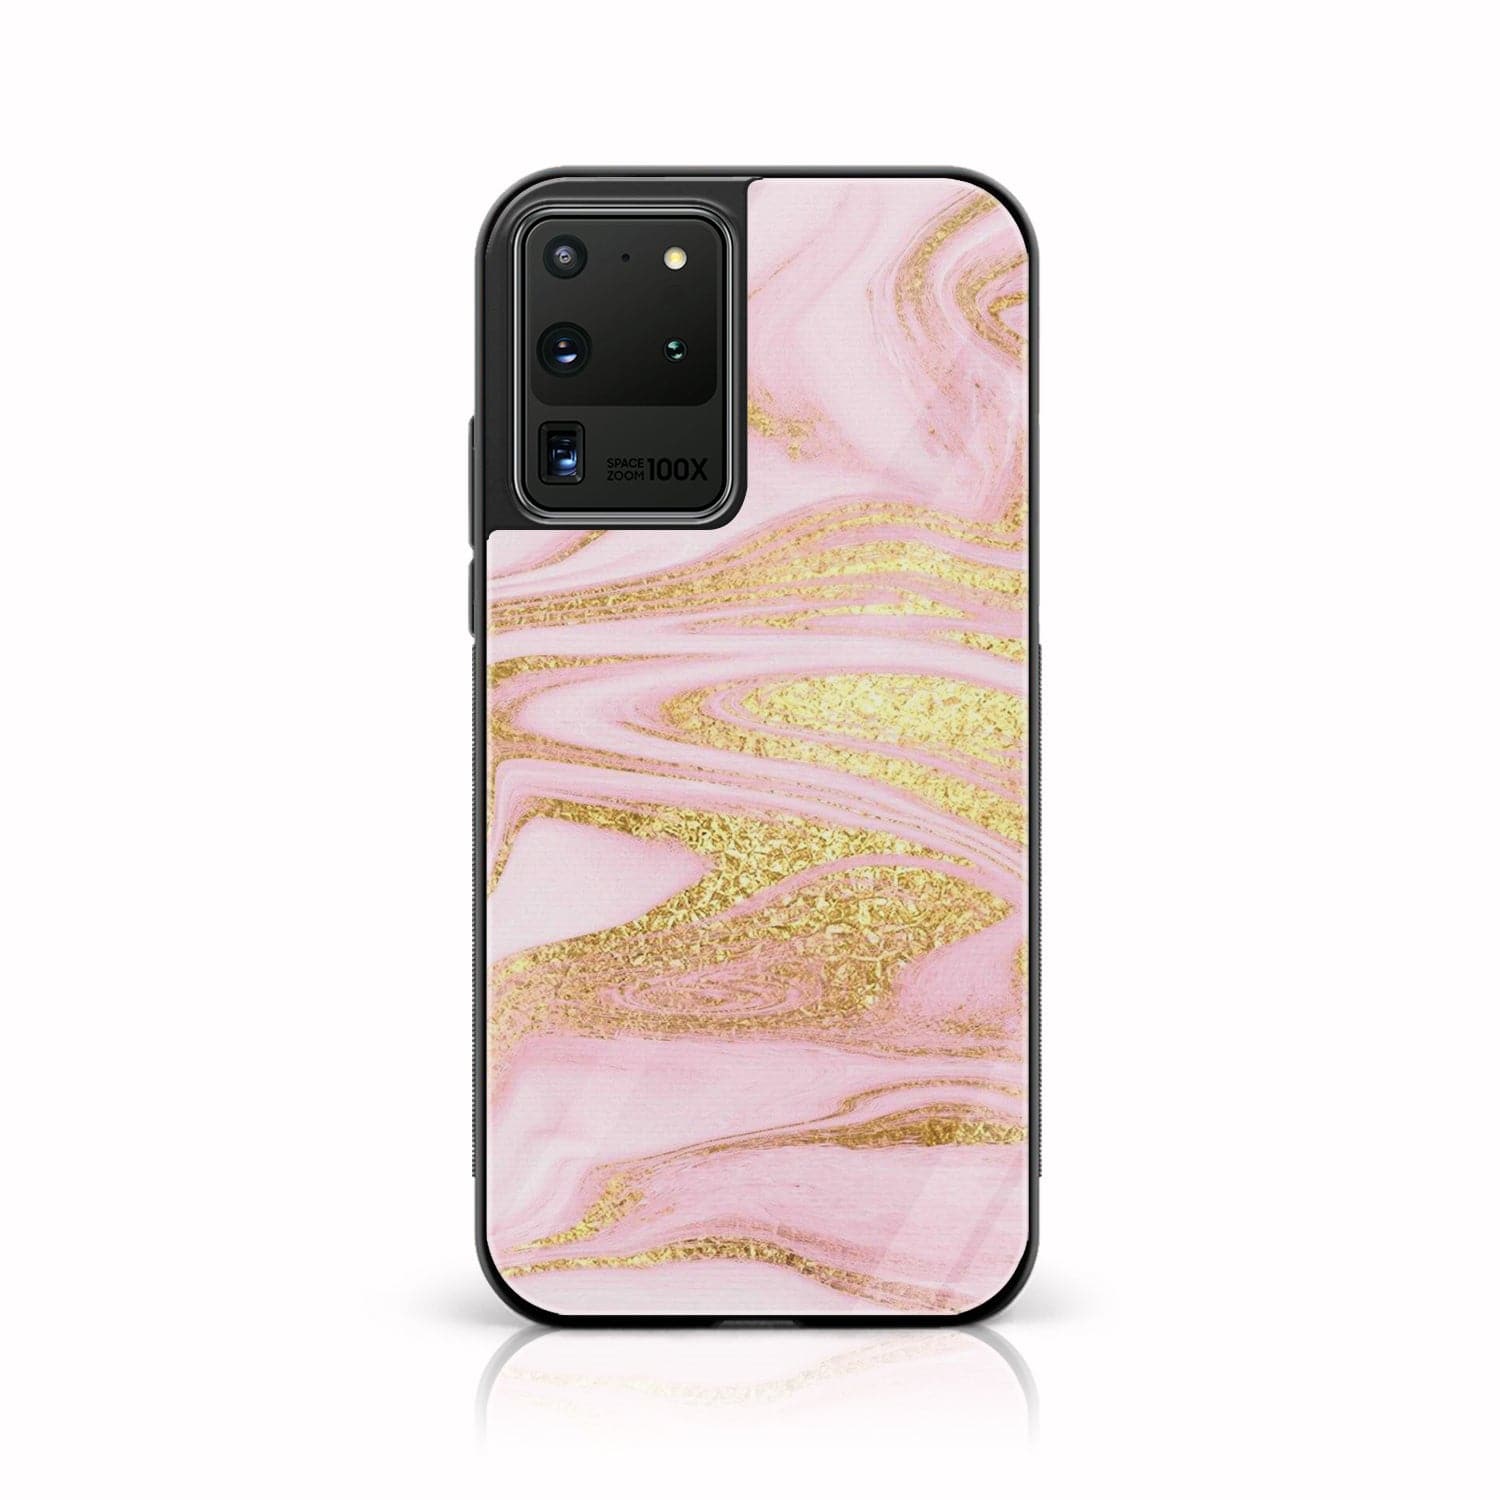 Samsung Galaxy S20 Ultra - Pink Marble Series - Premium Printed Glass soft Bumper shock Proof Case